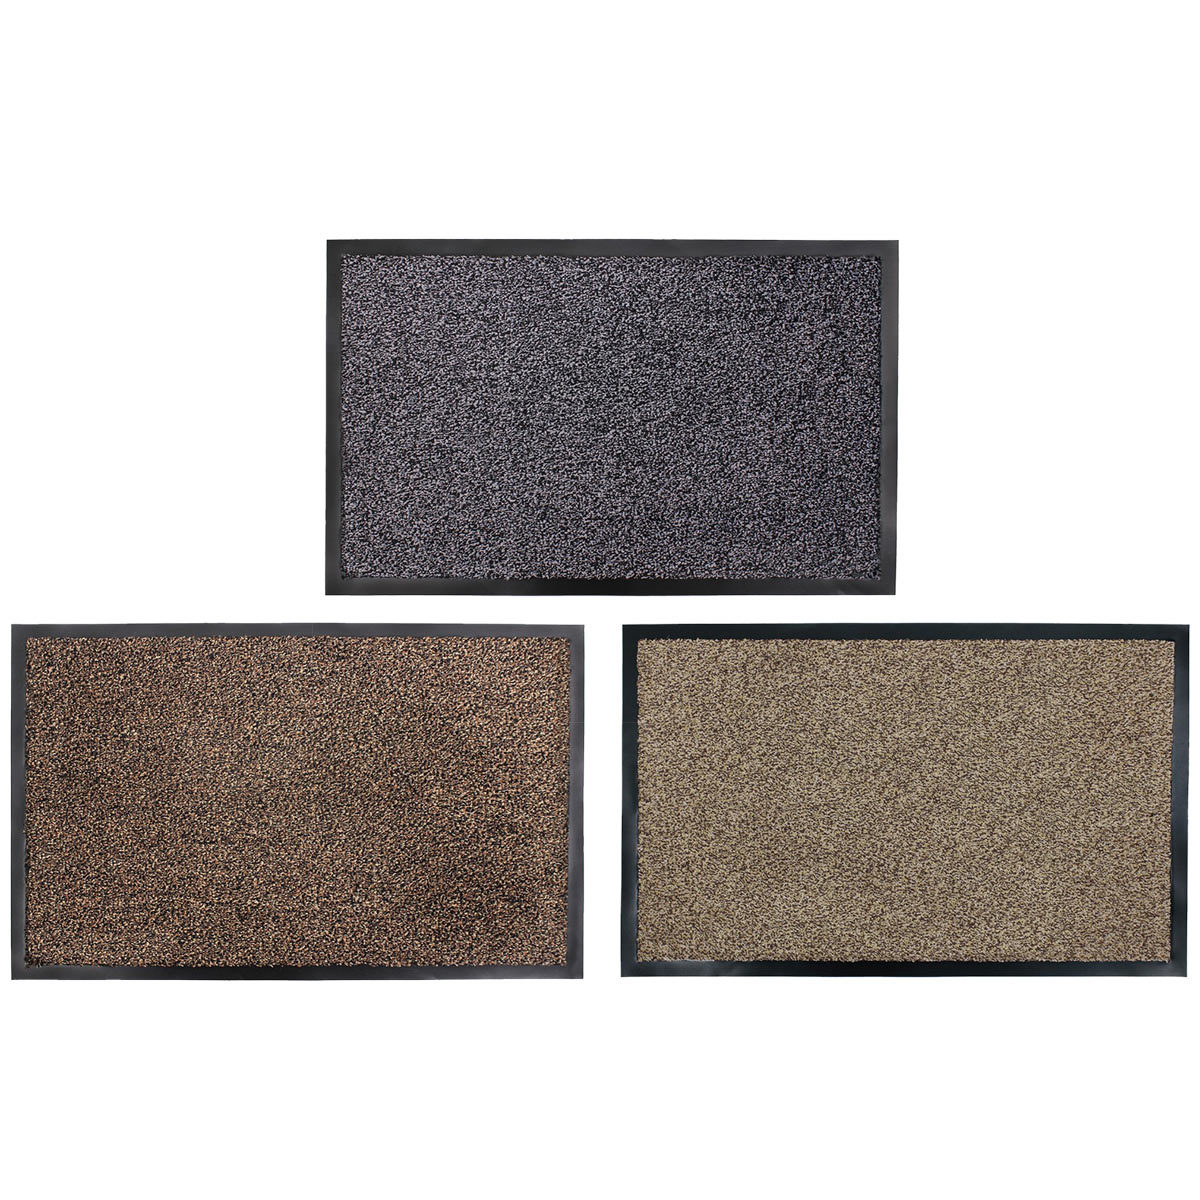 JVL Admiral Microfibre Barrier Mat in 3 Colours - 2 Pack